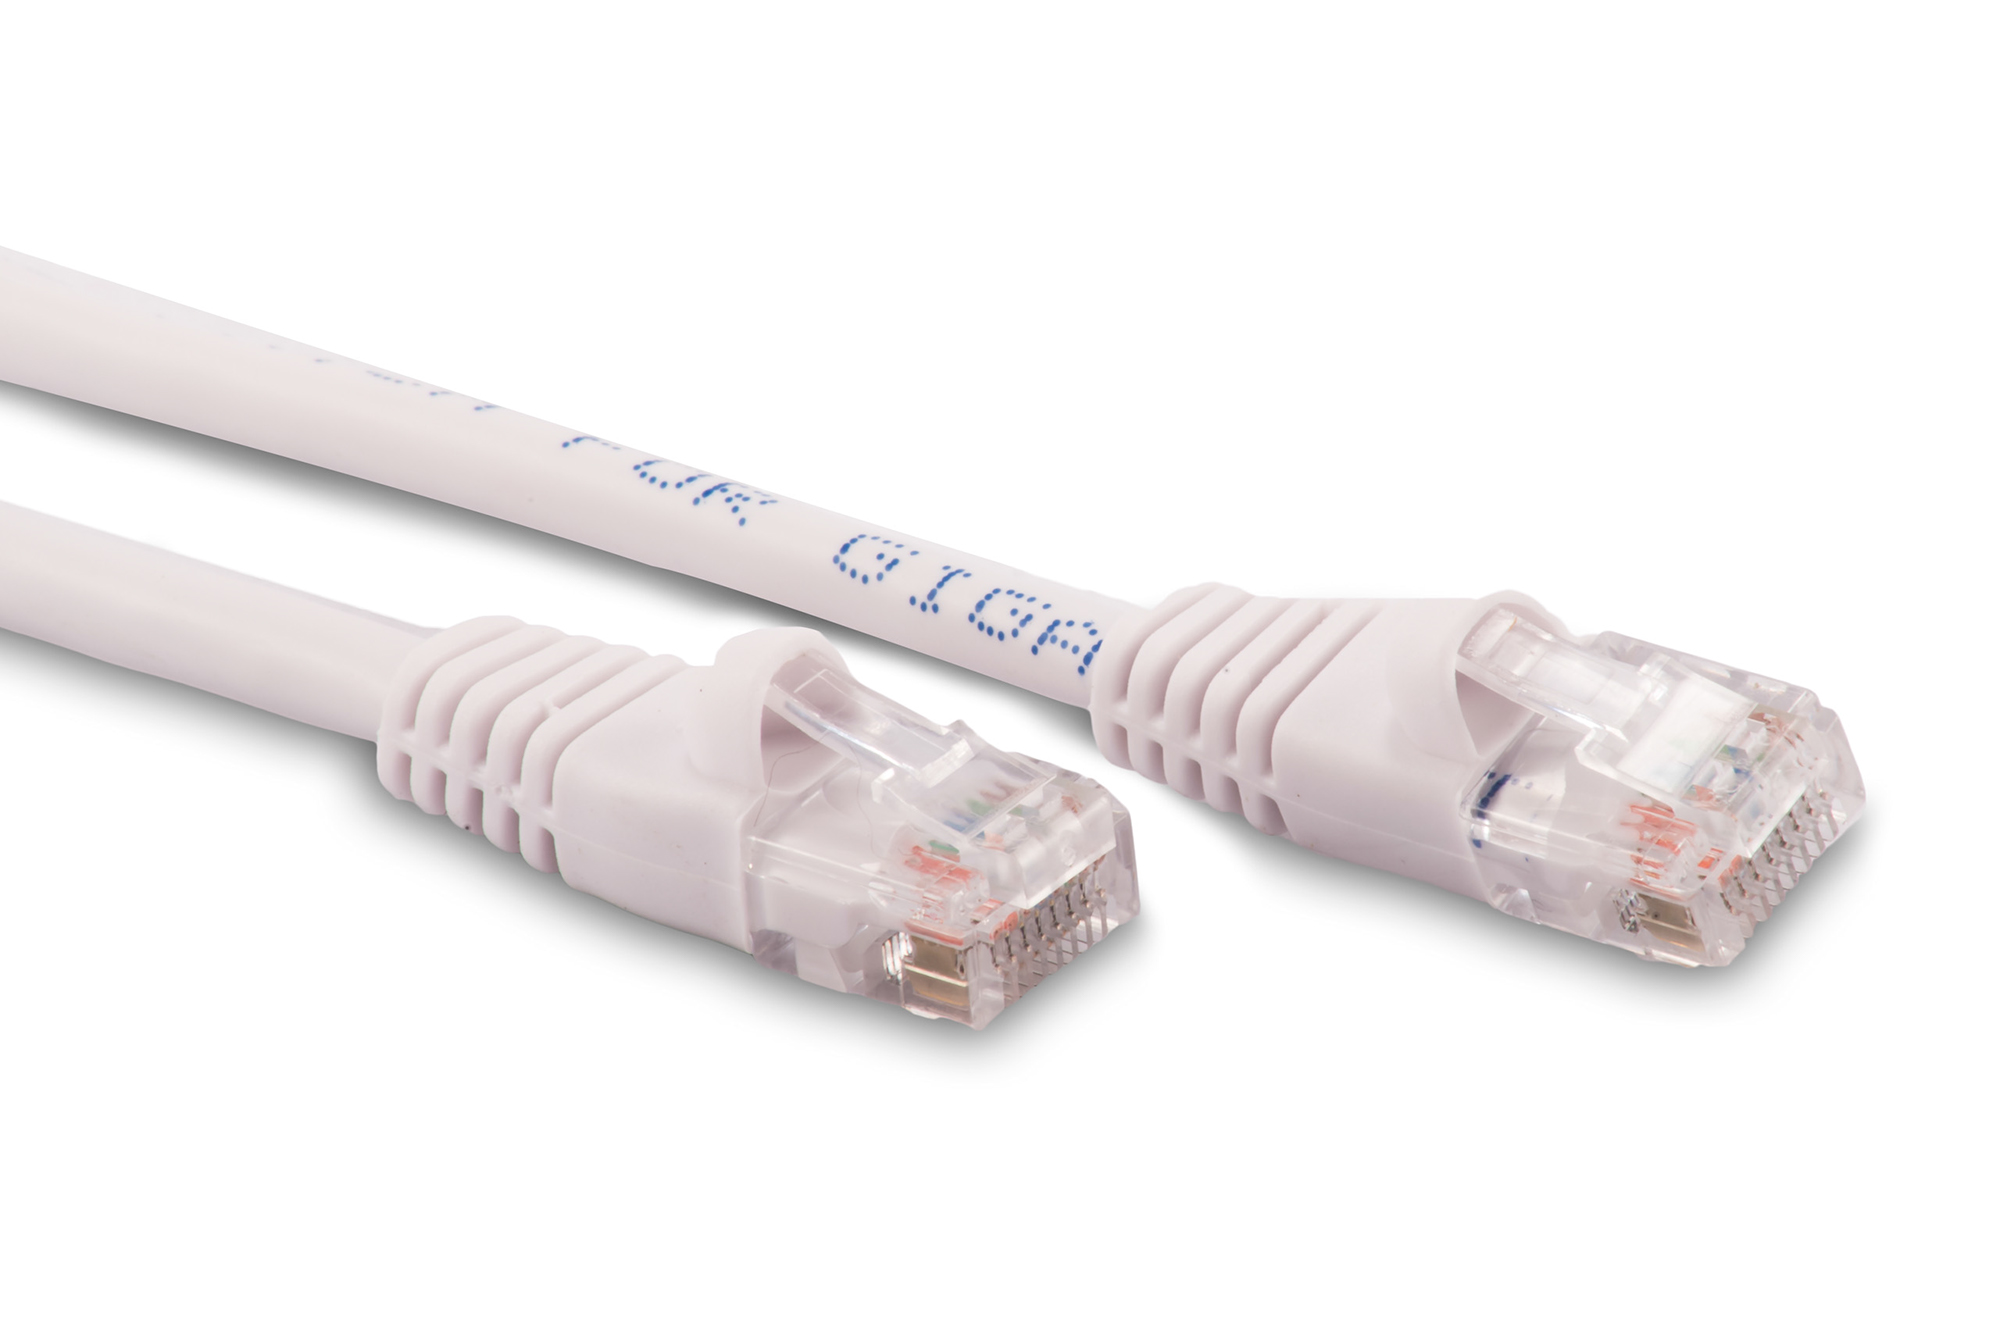 100ft Cat6 Ethernet Patch Cable - White Color - Snagless Boot, Stranded, RJ45, 550Mhz, 24AWG